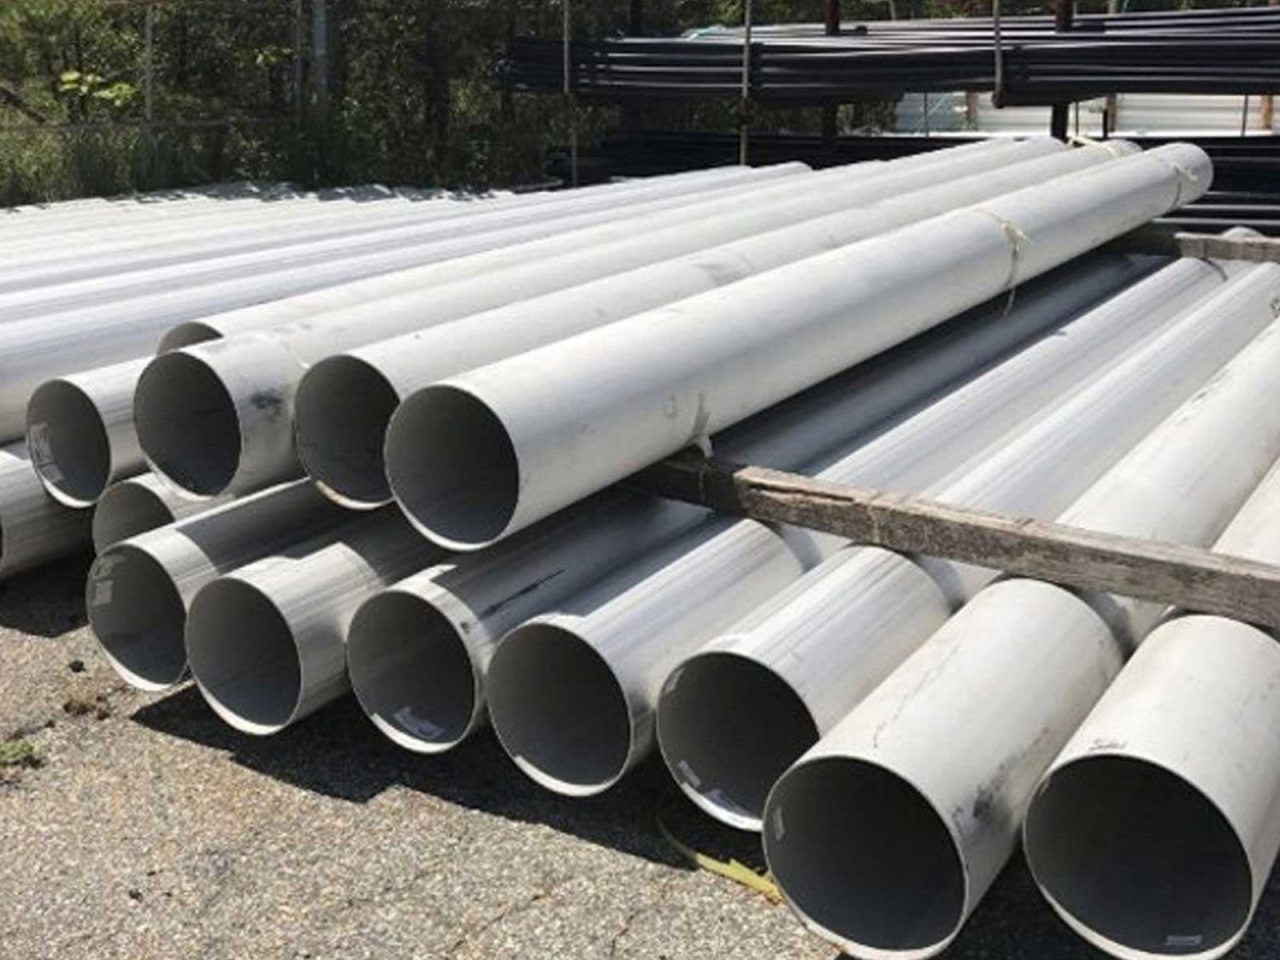 UNS-S32750-and-S32760-Stainless-Steel-Pipe-1280x960.jpg